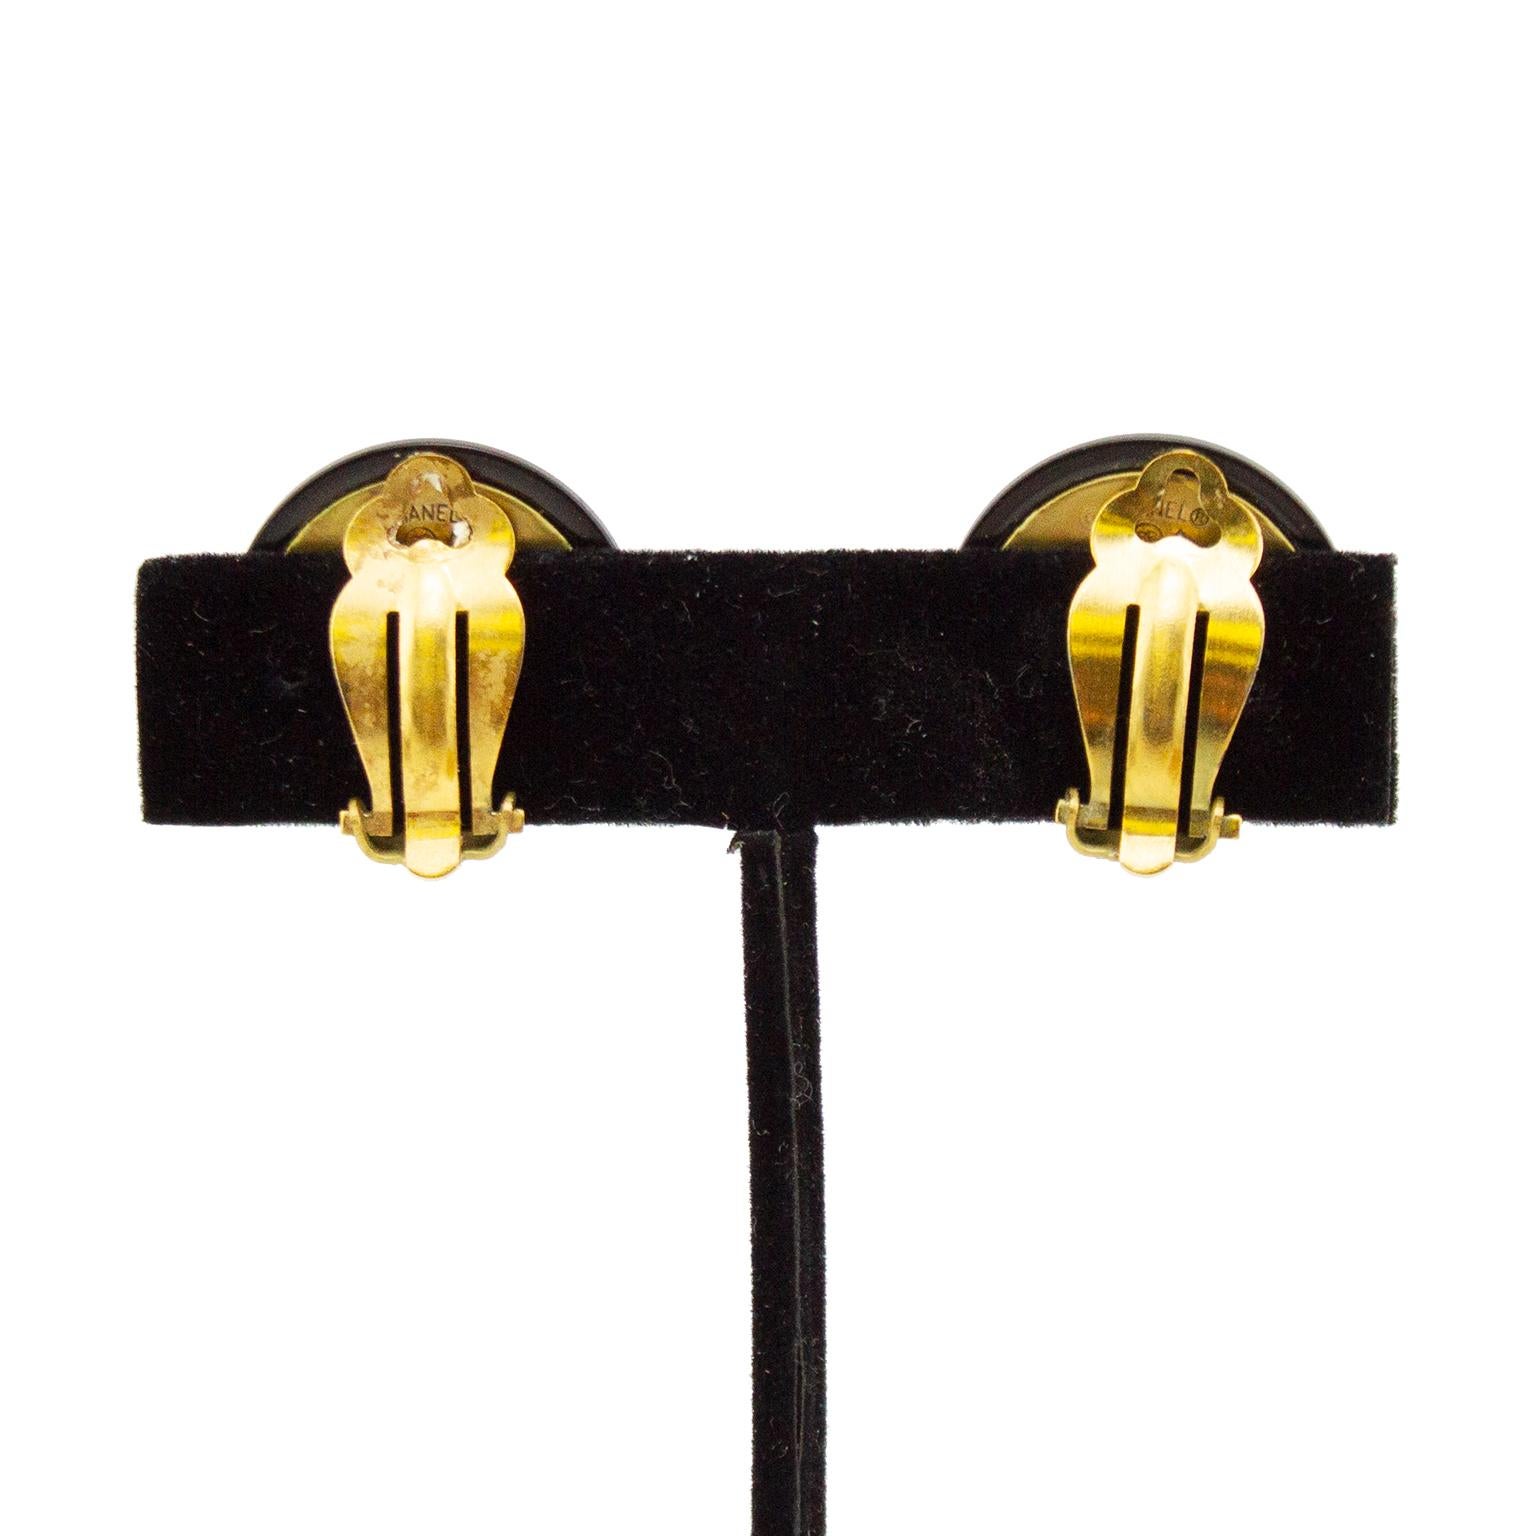 Chanel clip on earrings from the Autumn 1994 collection. Small black resin buttons with gold tone metal rooster details. Backs are gold tone metal clips with Chanel markings. Excellent vintage condition. Perfect gift for anyone who is the year of